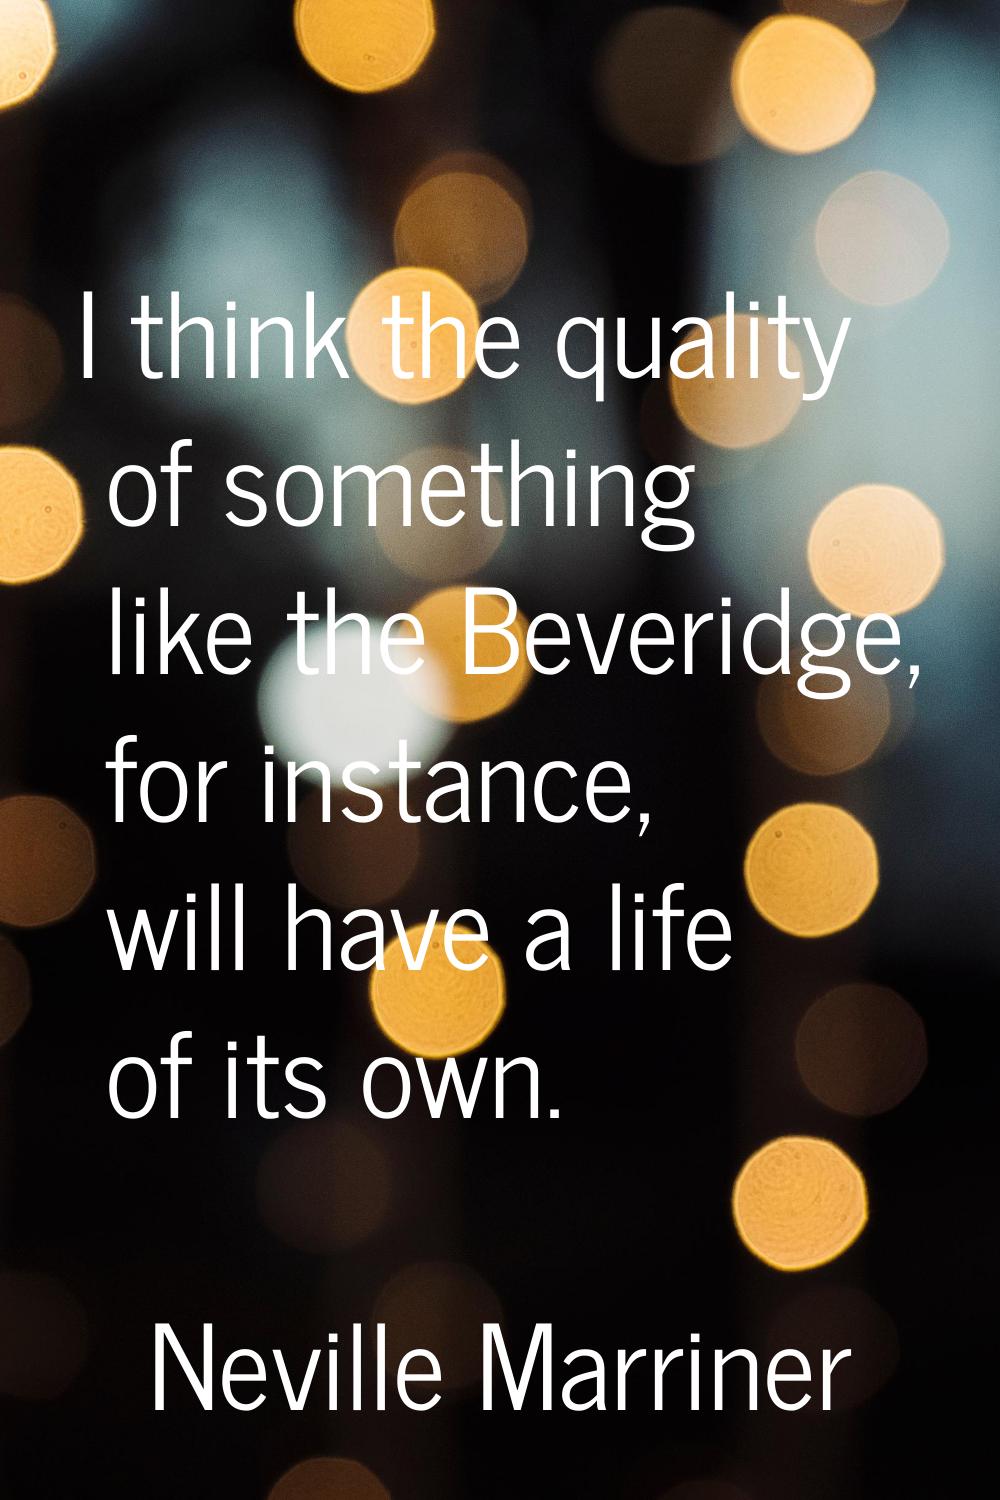 I think the quality of something like the Beveridge, for instance, will have a life of its own.